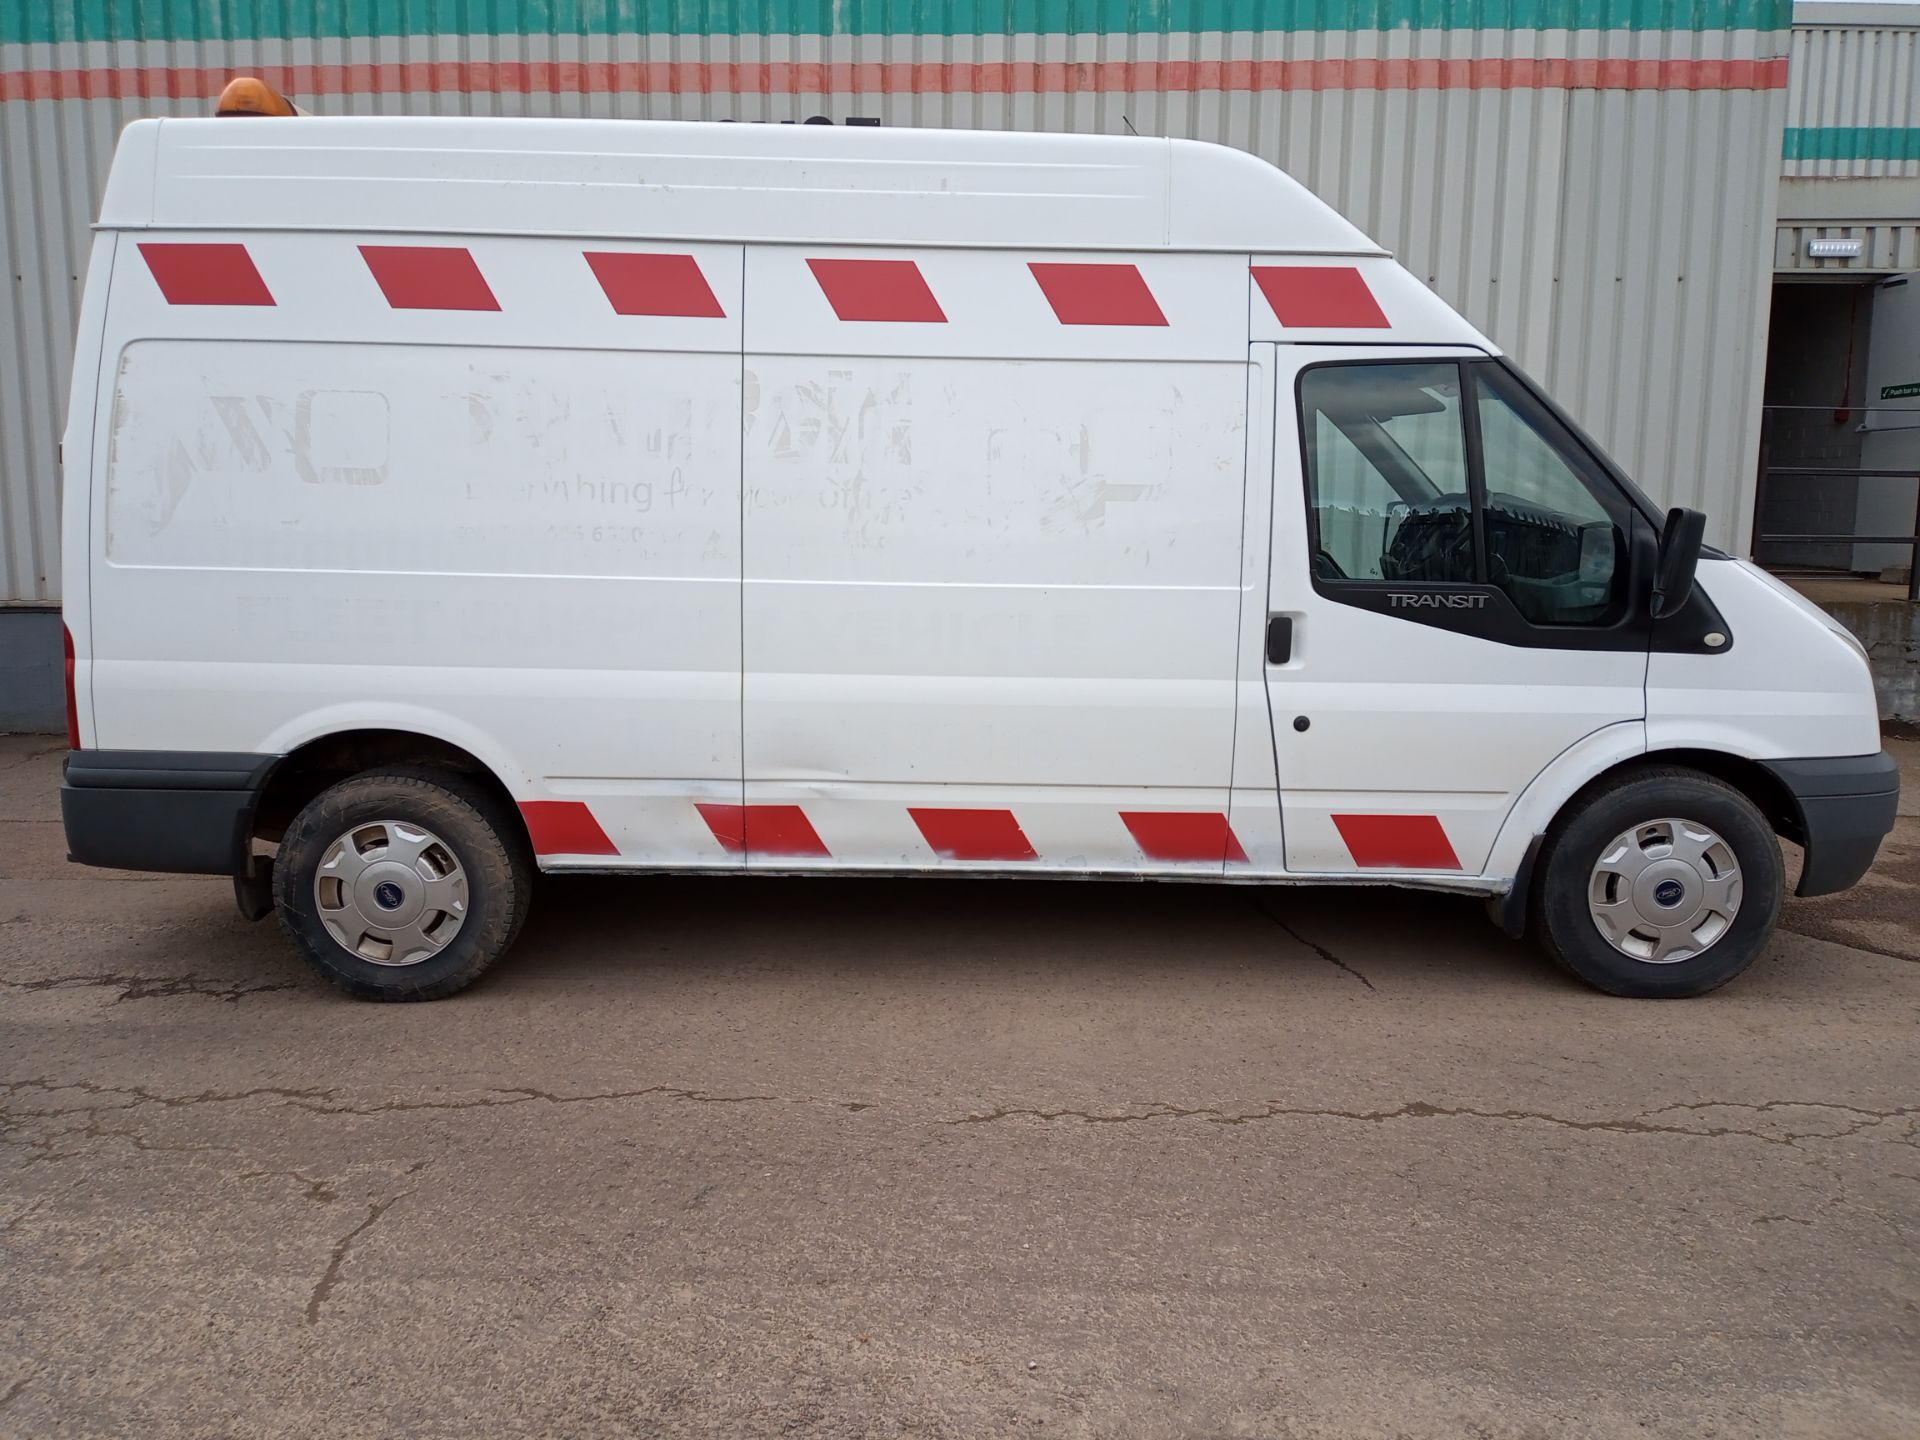 2011 Ford Transit 115 T350i RWD LWB Medium Roof - CL505 - Location: Corby, Northamptonshire140,182 - Image 5 of 16